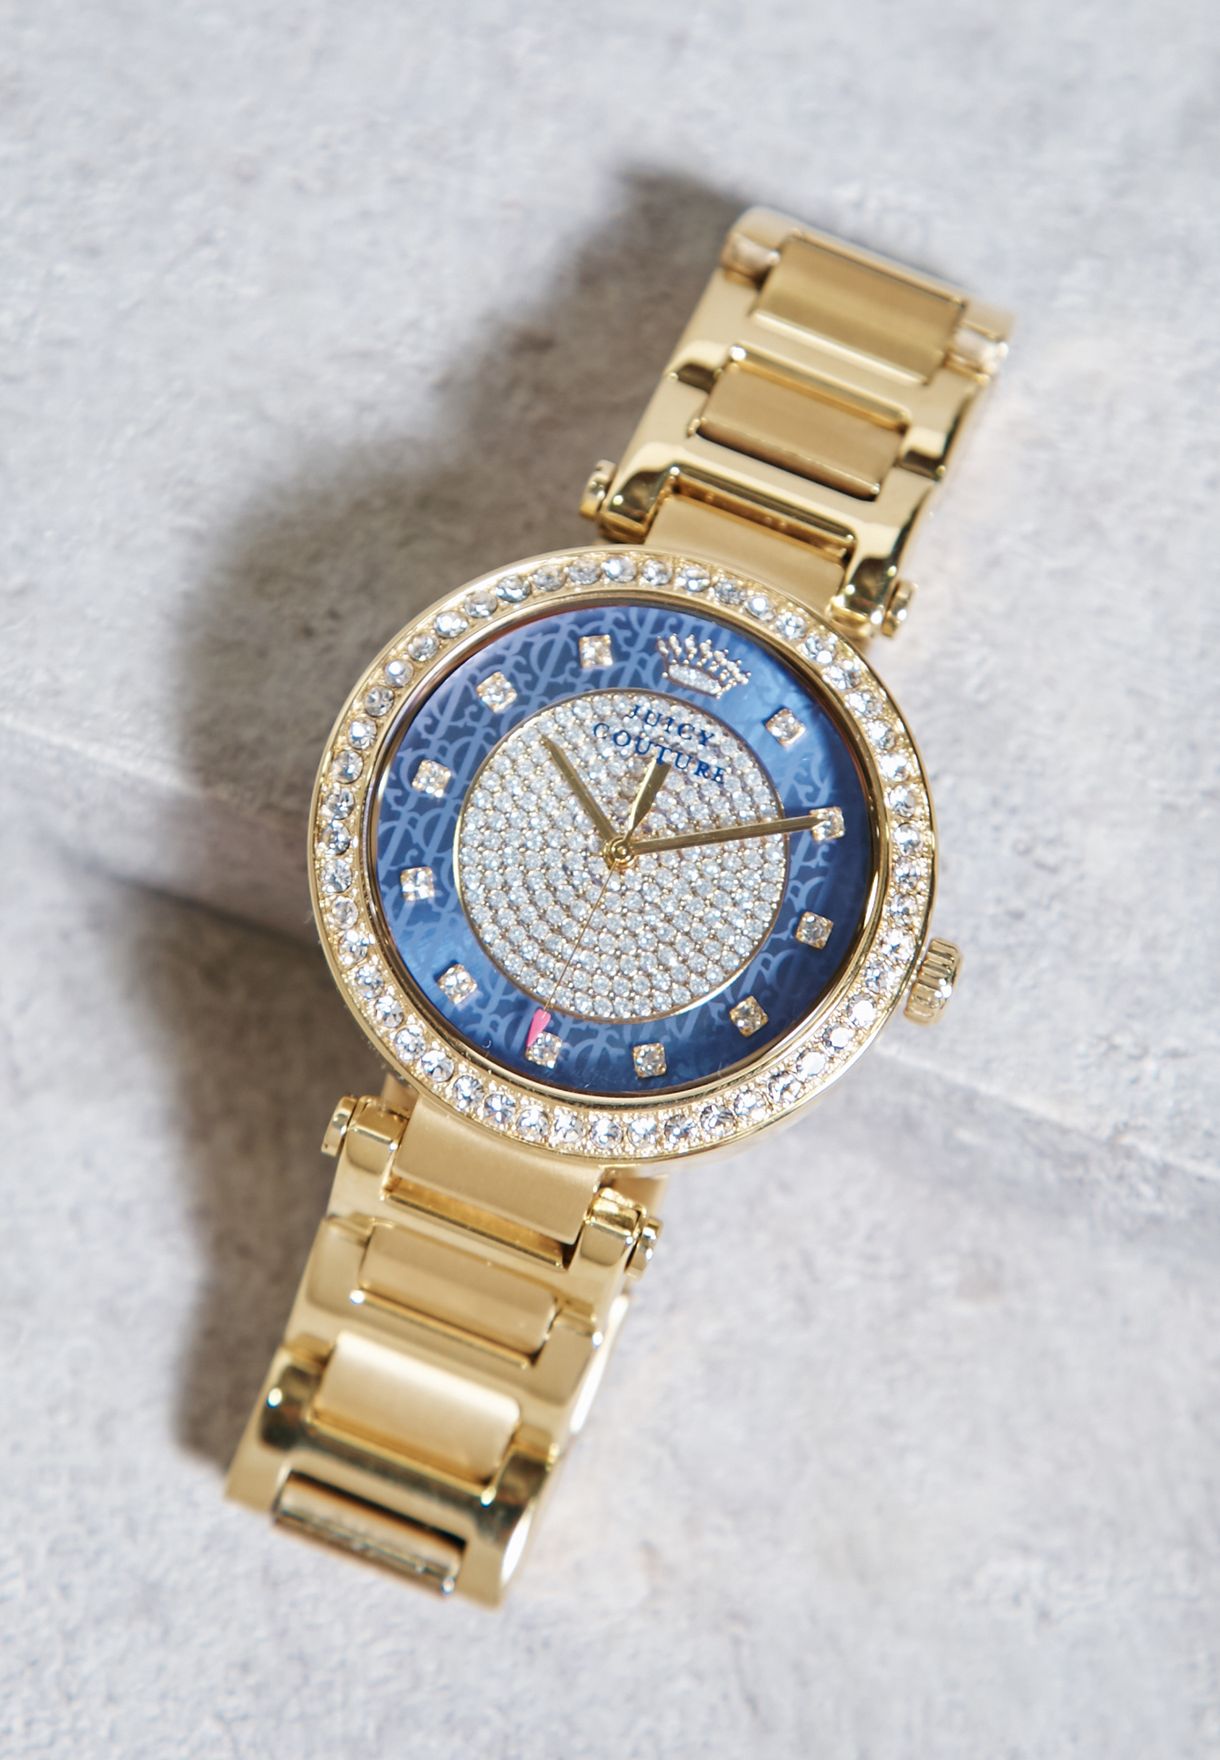 Buy Juicy Couture Gold Luxe Couture Watch For Women In Dubai Abu Dhabi 1901267